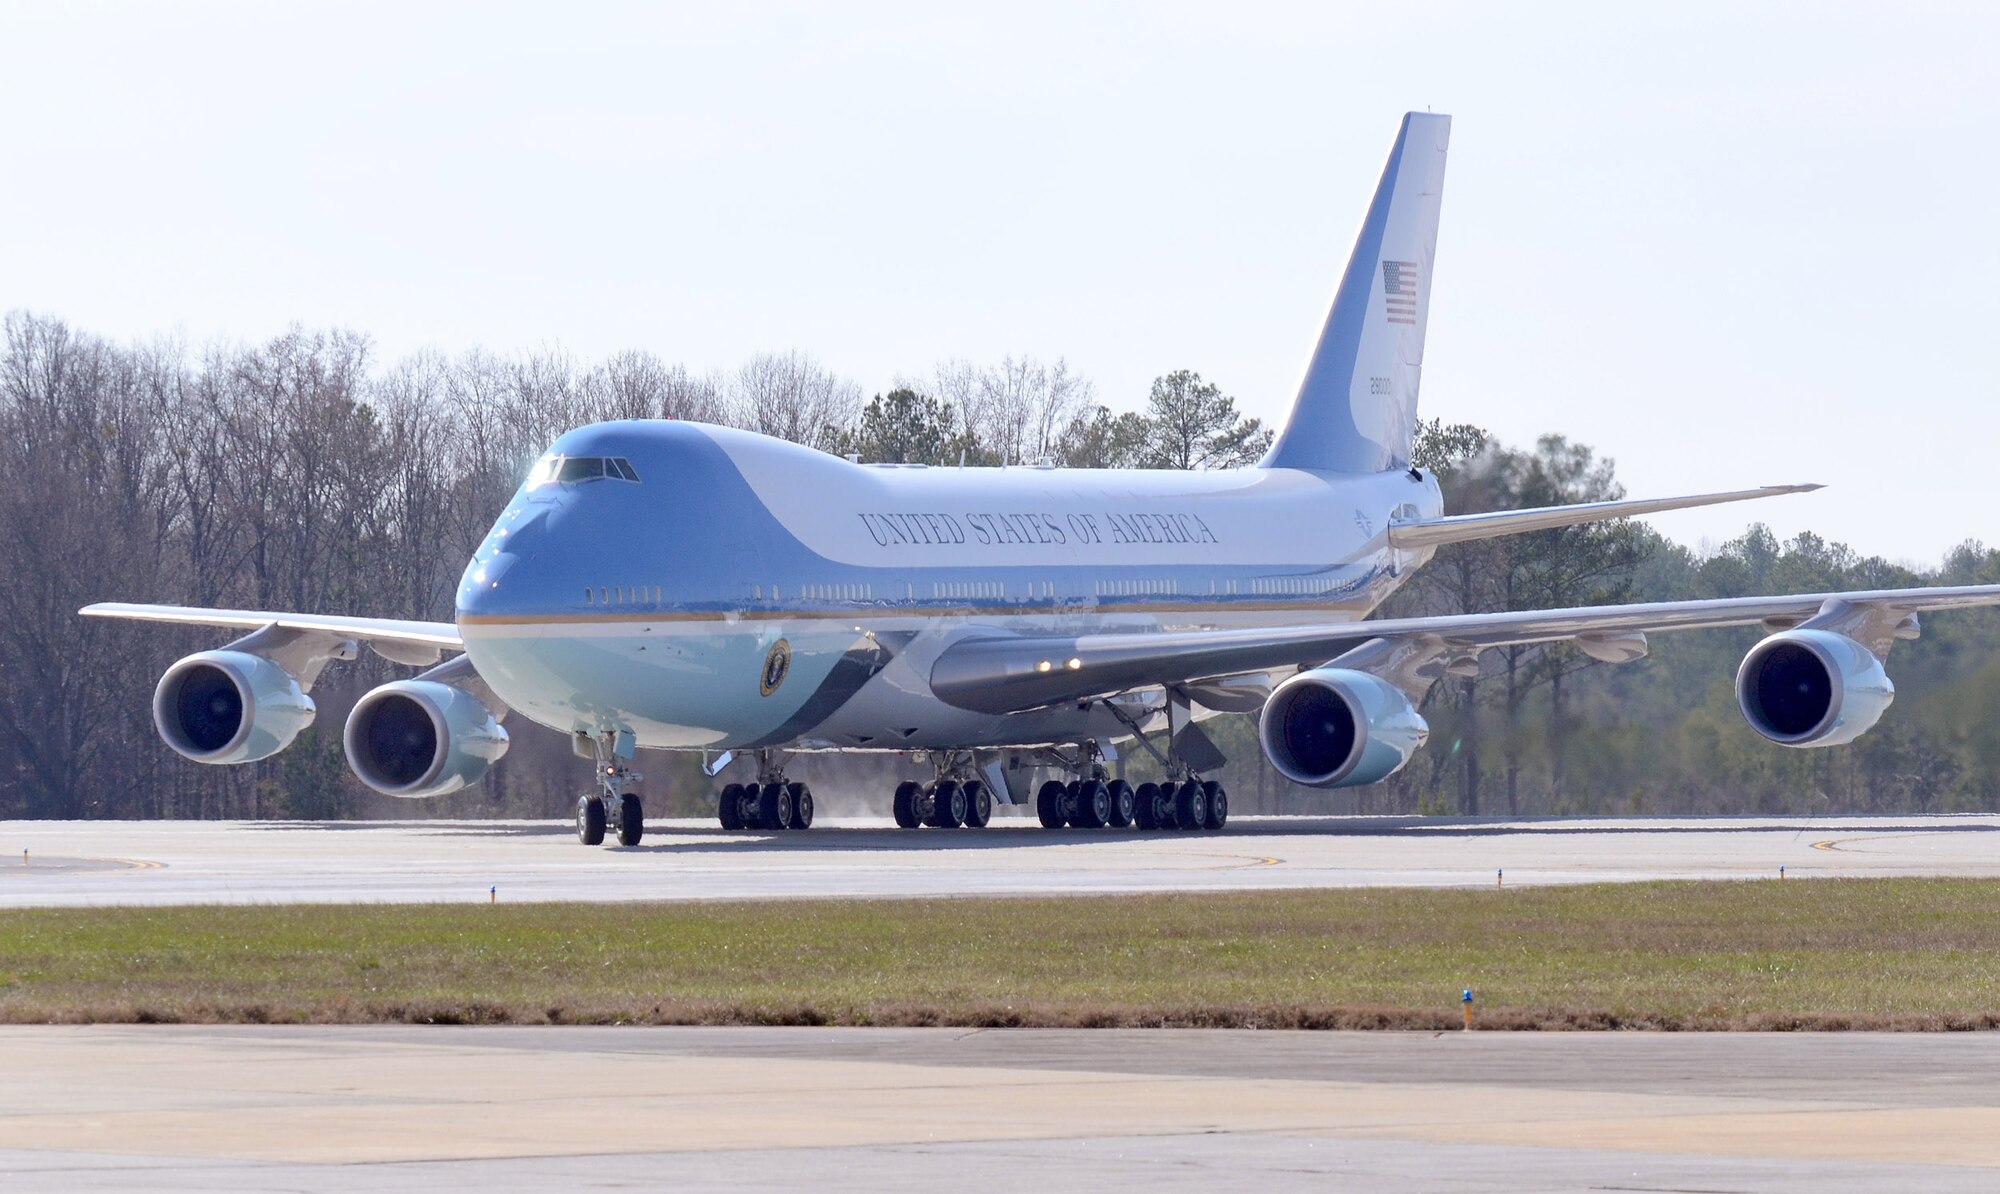 Air Force One taxis toward the parking ramp at Dobbins Air Reserve Base, Marietta, Ga., Feb. 14.  President Obama is going to the City of Decatur Recreation Center today to discuss proposals outlined in his state of the union speech.  (U.S. Air Force photo/ Brad Fallin)